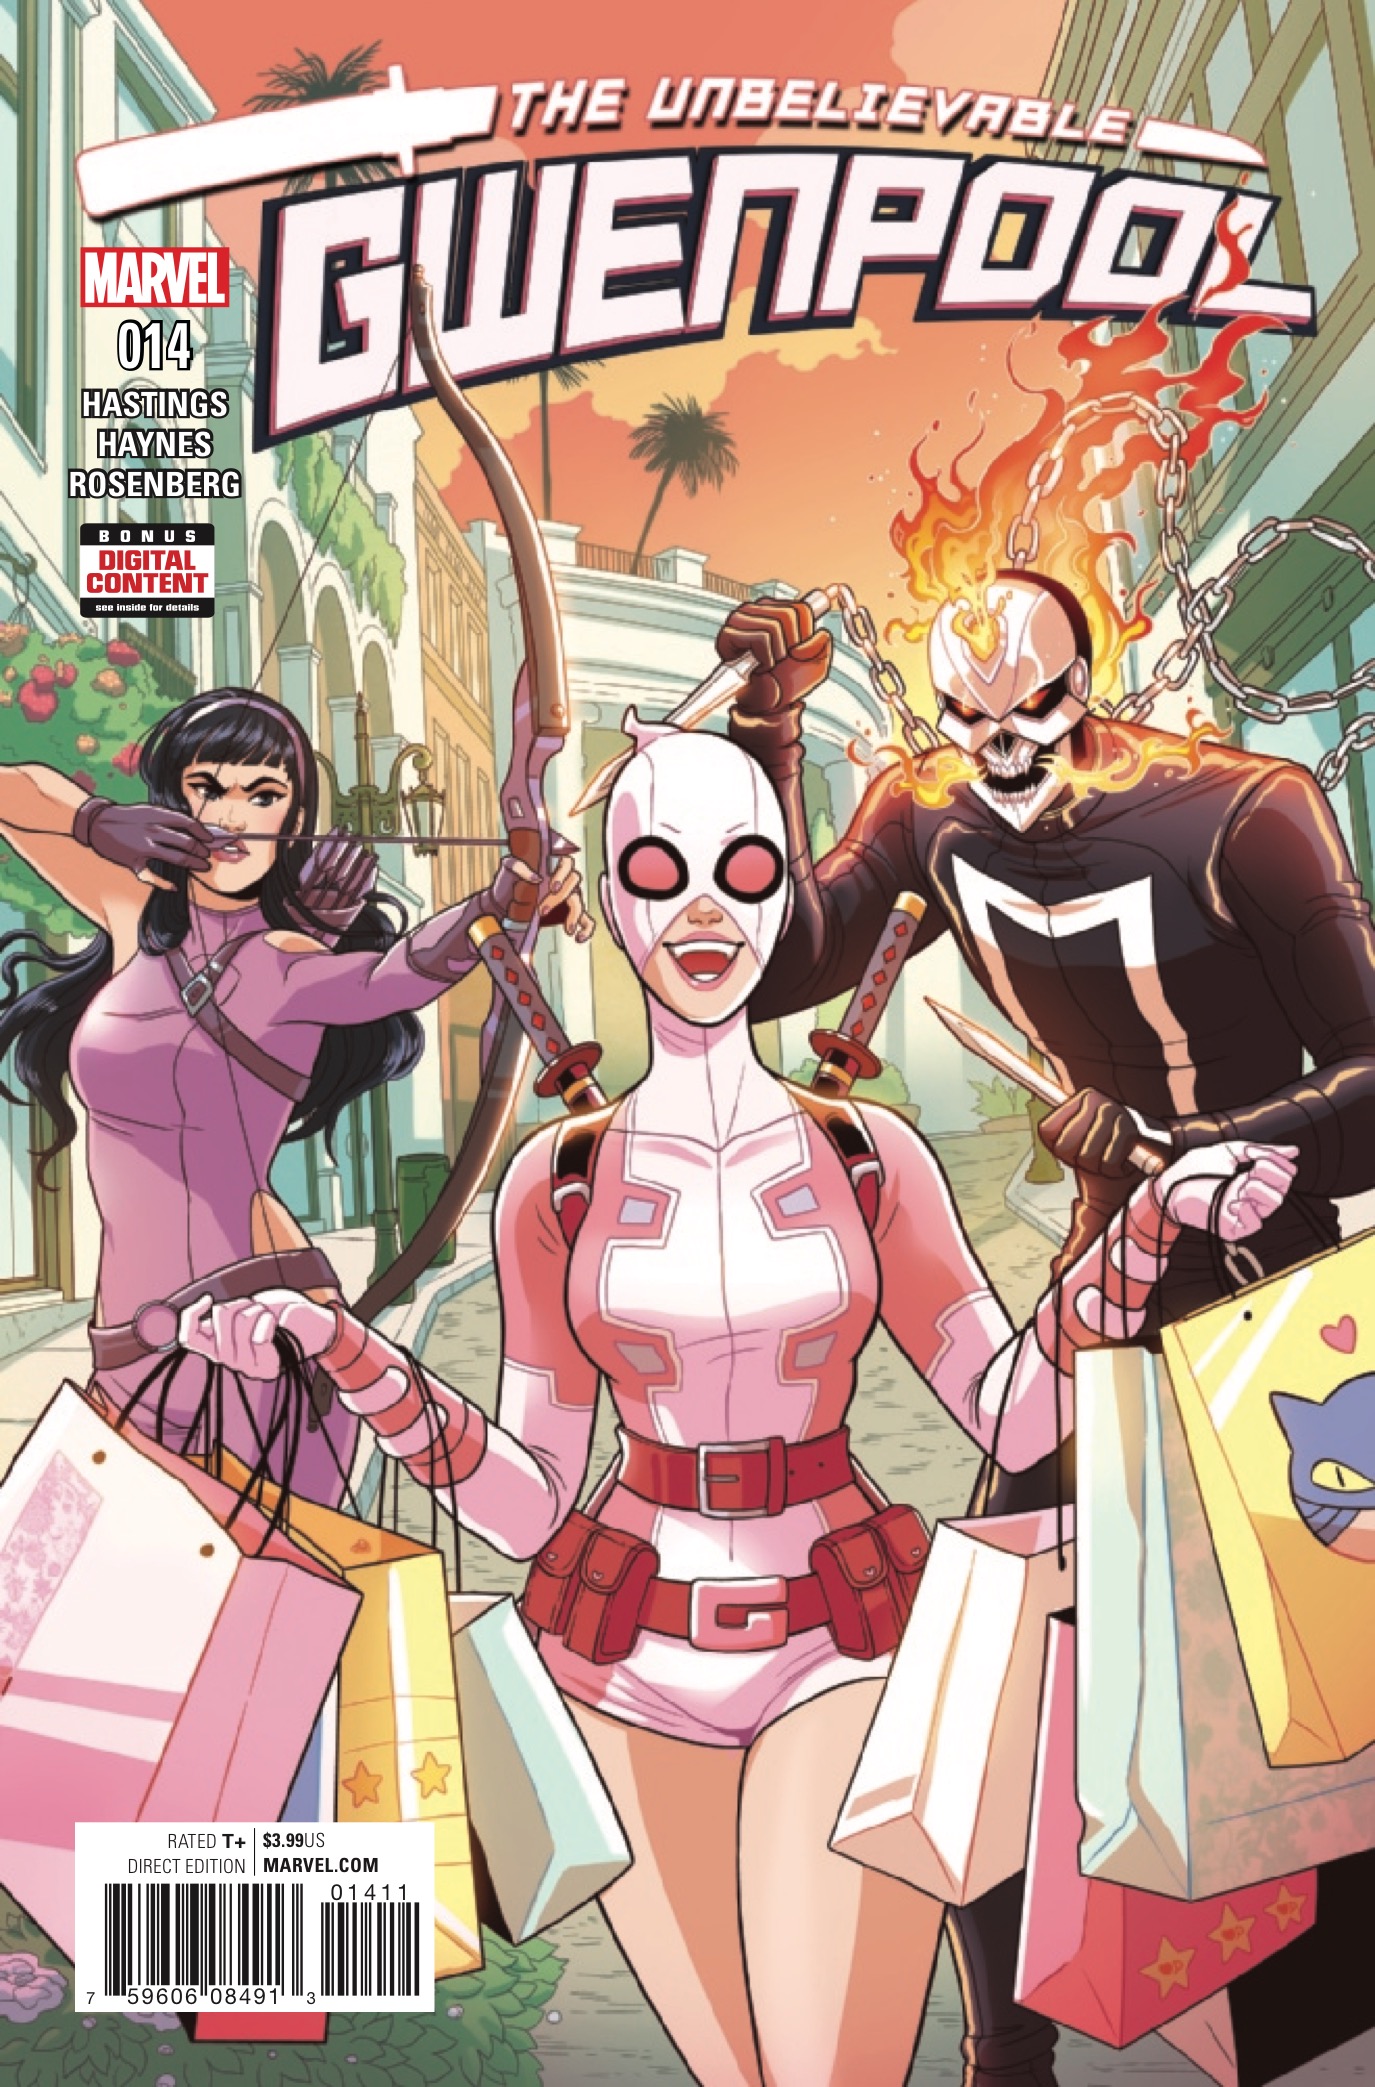 Marvel Preview: Gwenpool, The Unbelievable #14